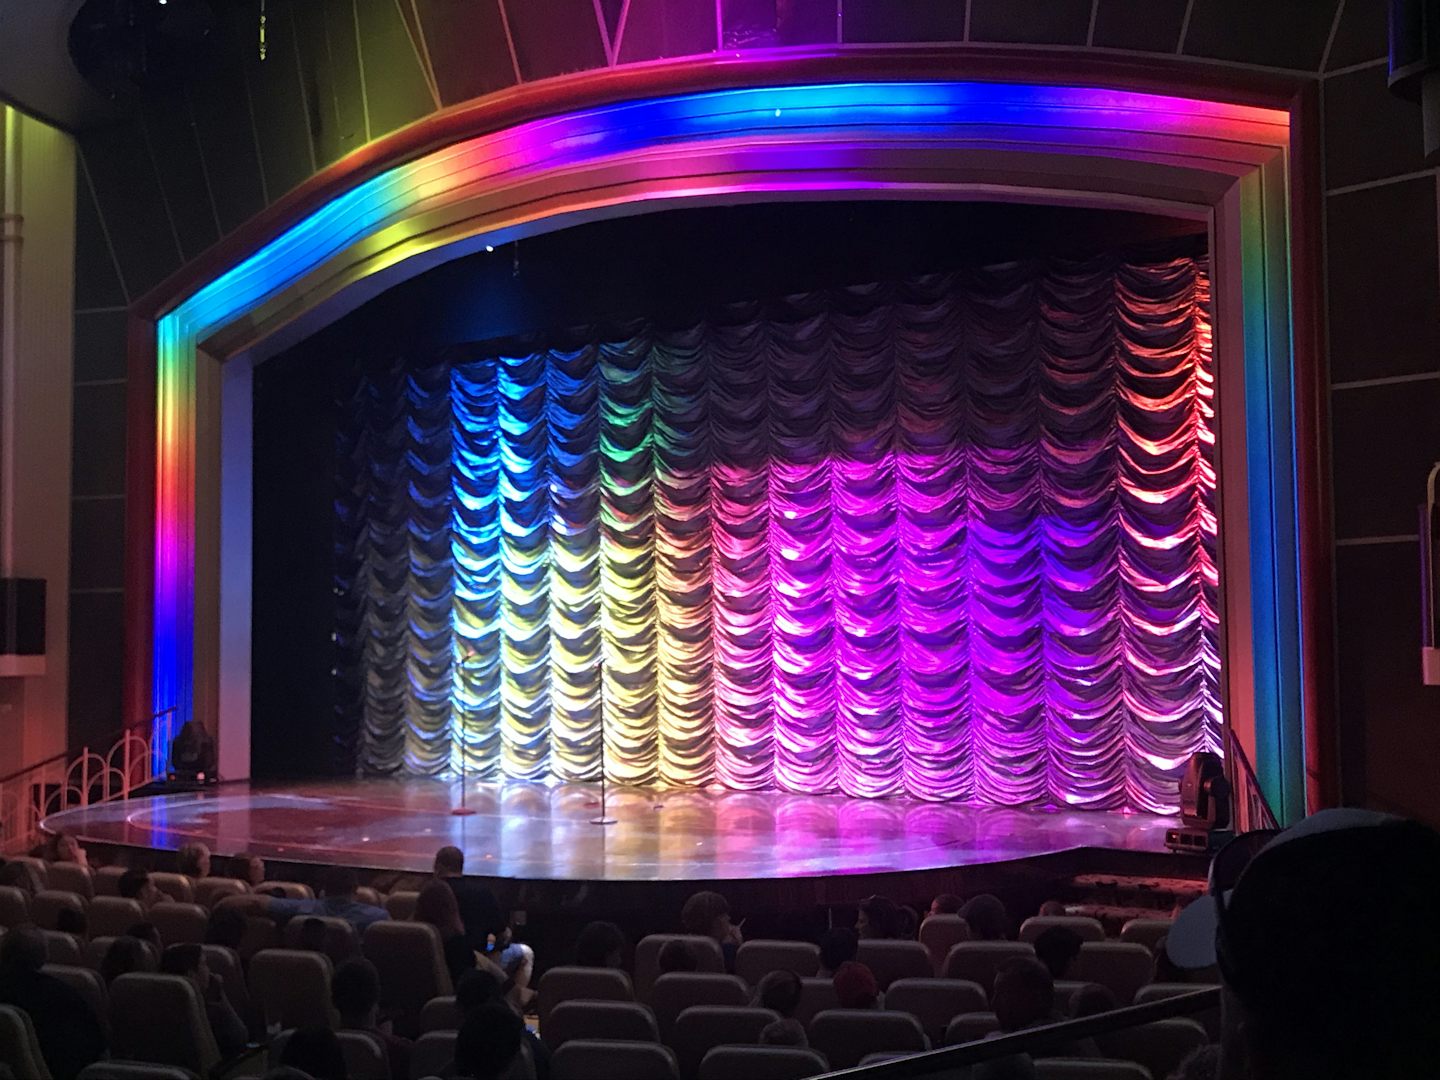 The lighting on the stage in the main theater. So pretty!